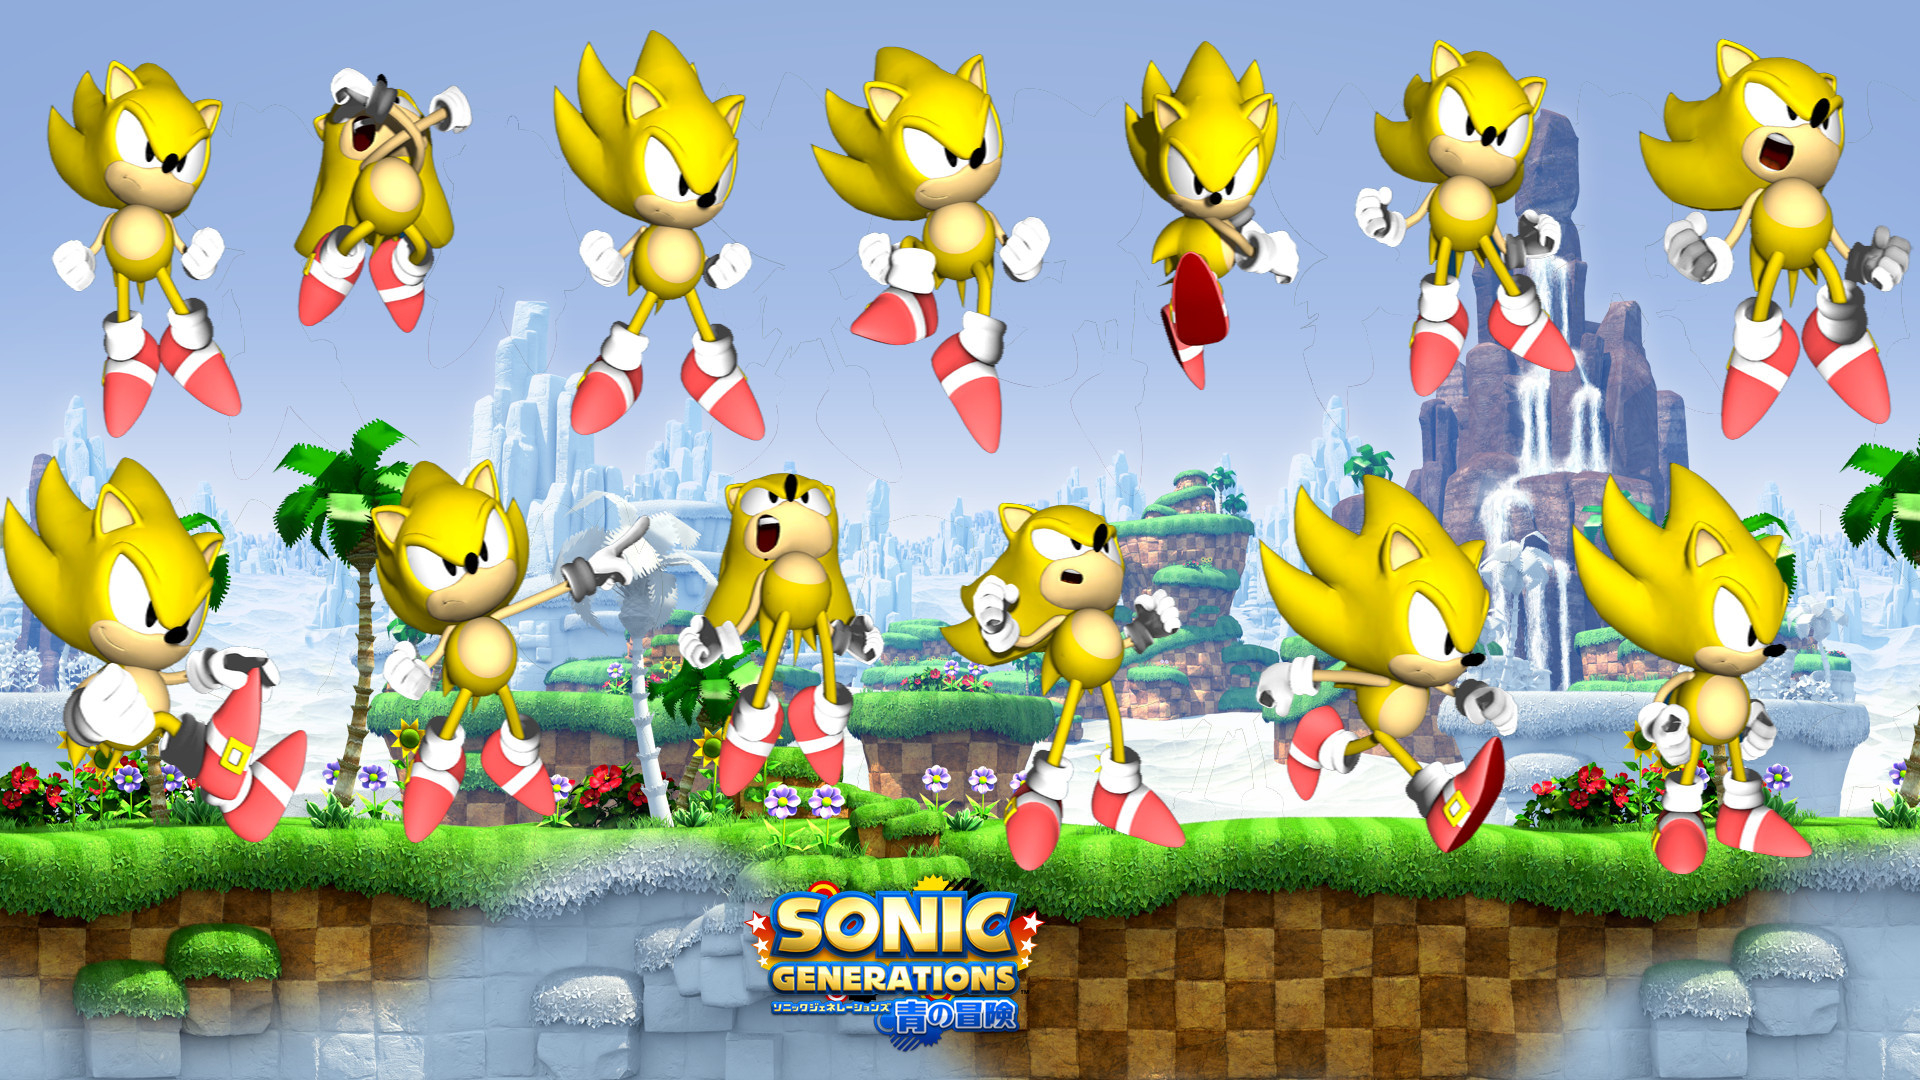 1920x1080 SONIC GENERATIONS WALLPAPER 10 by SONICX2011 SONIC GENERATIONS WALLPAPER 10  by SONICX2011